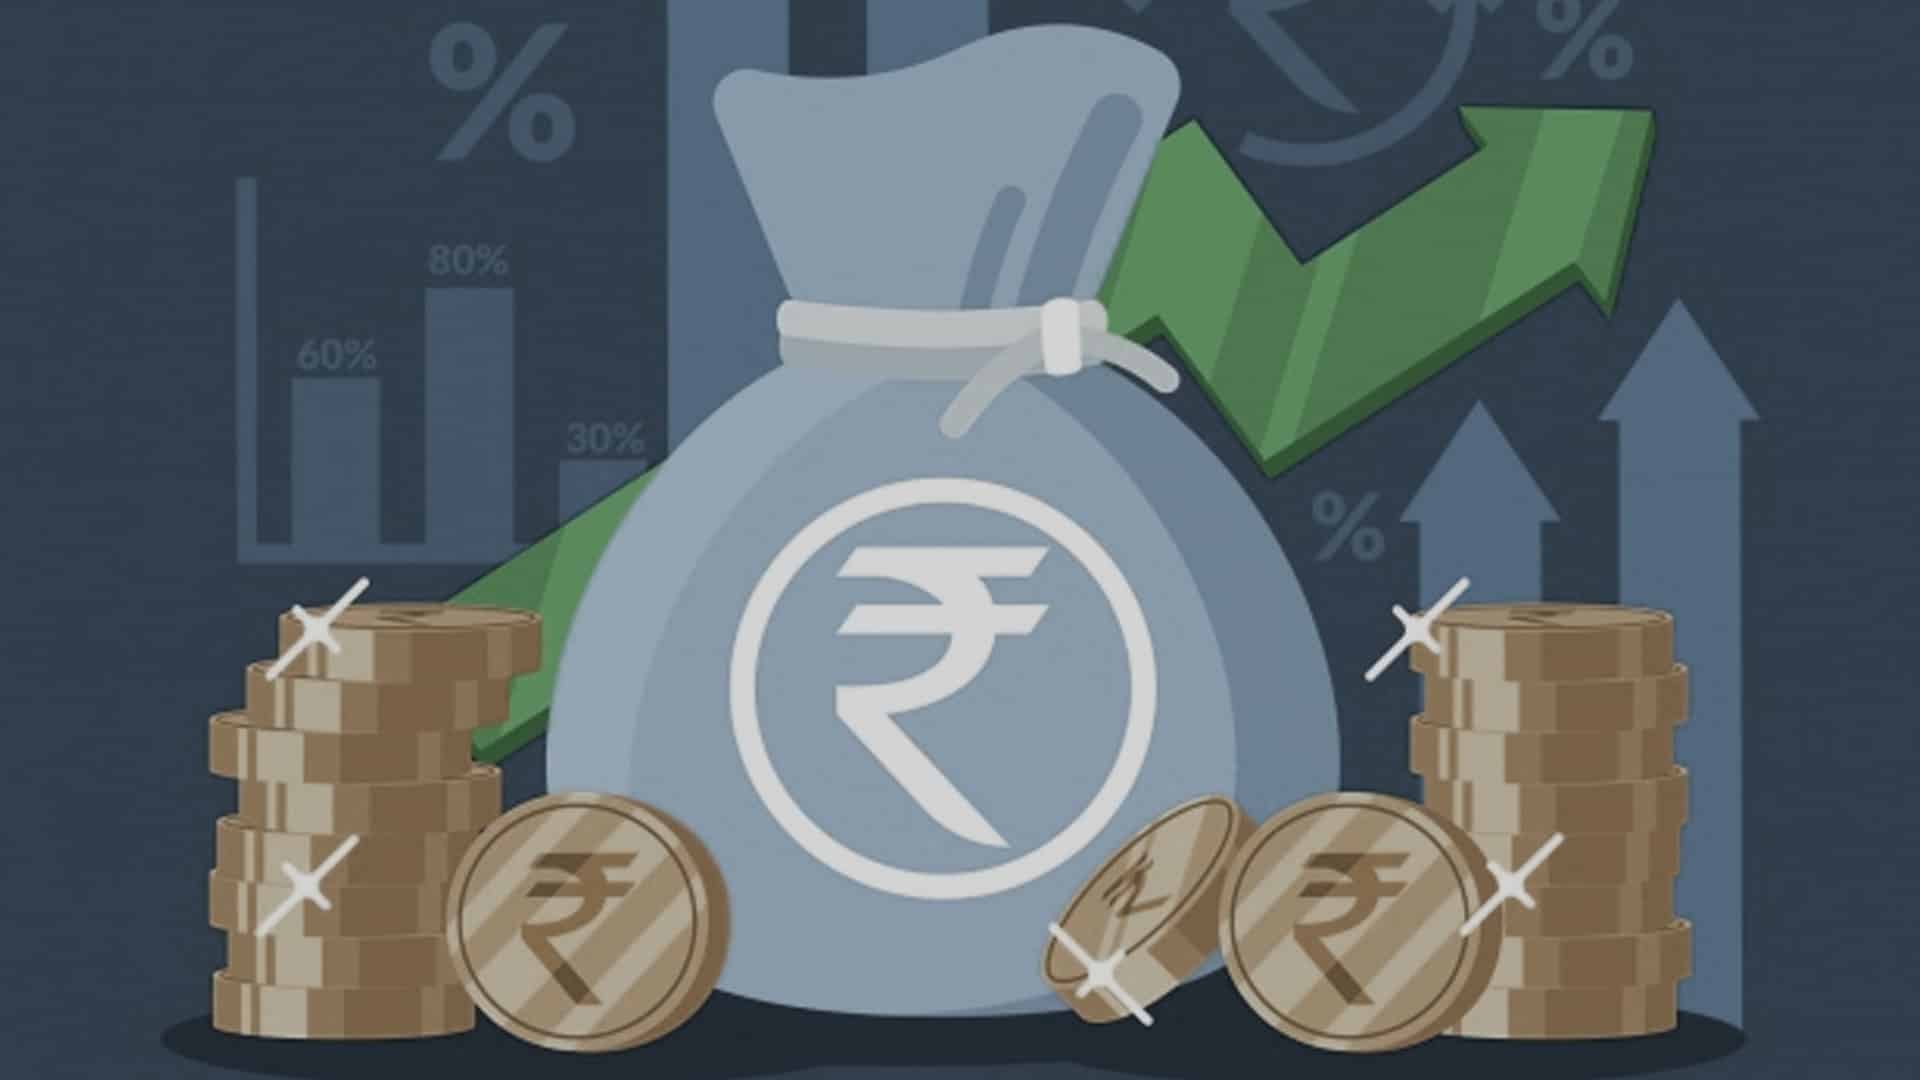 Neobank Jupiter mops up $86 mn in Series C round, valuation at $710 mn